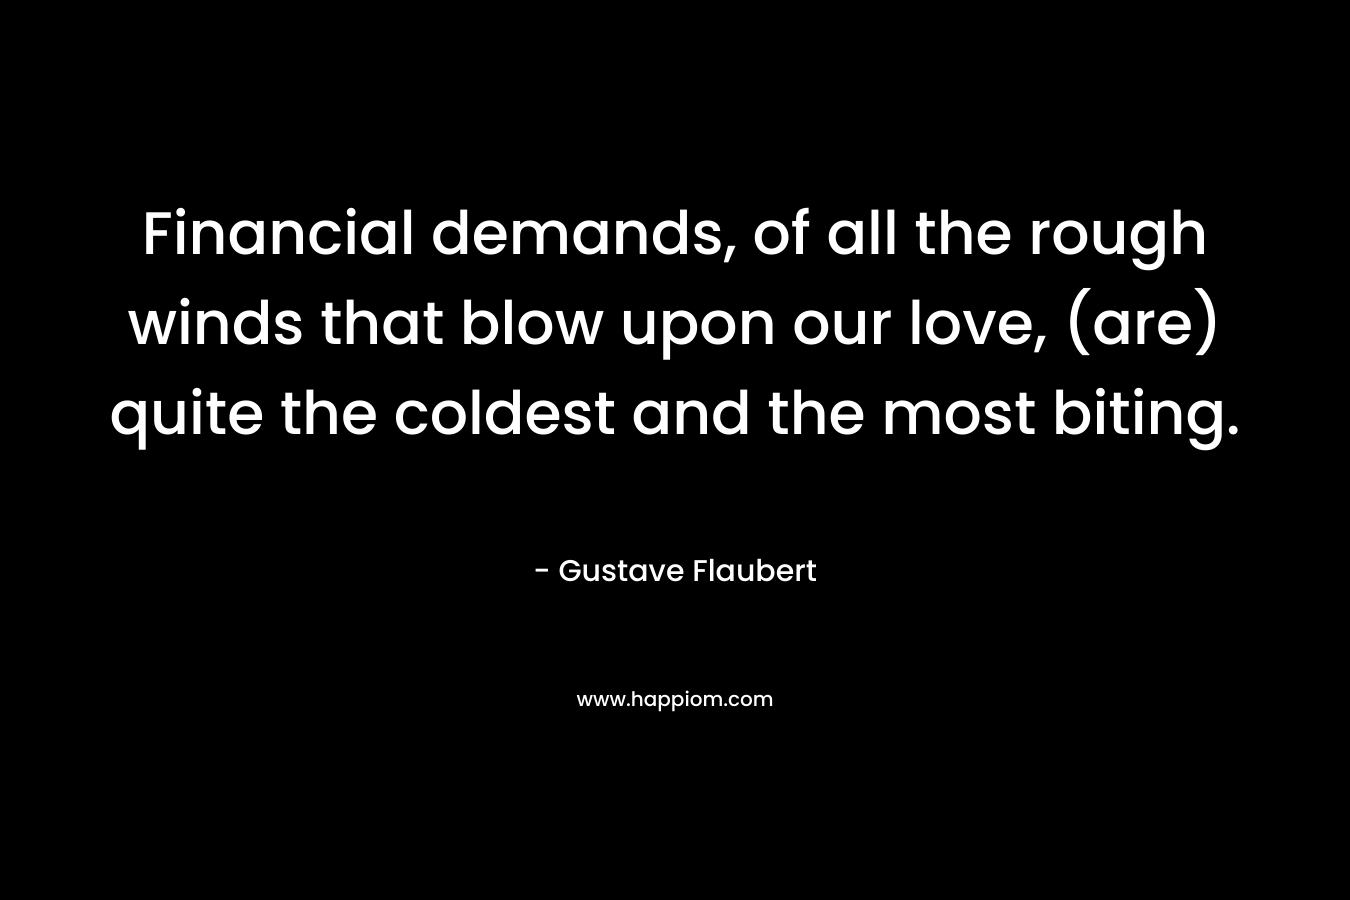 Financial demands, of all the rough winds that blow upon our love, (are) quite the coldest and the most biting. – Gustave Flaubert